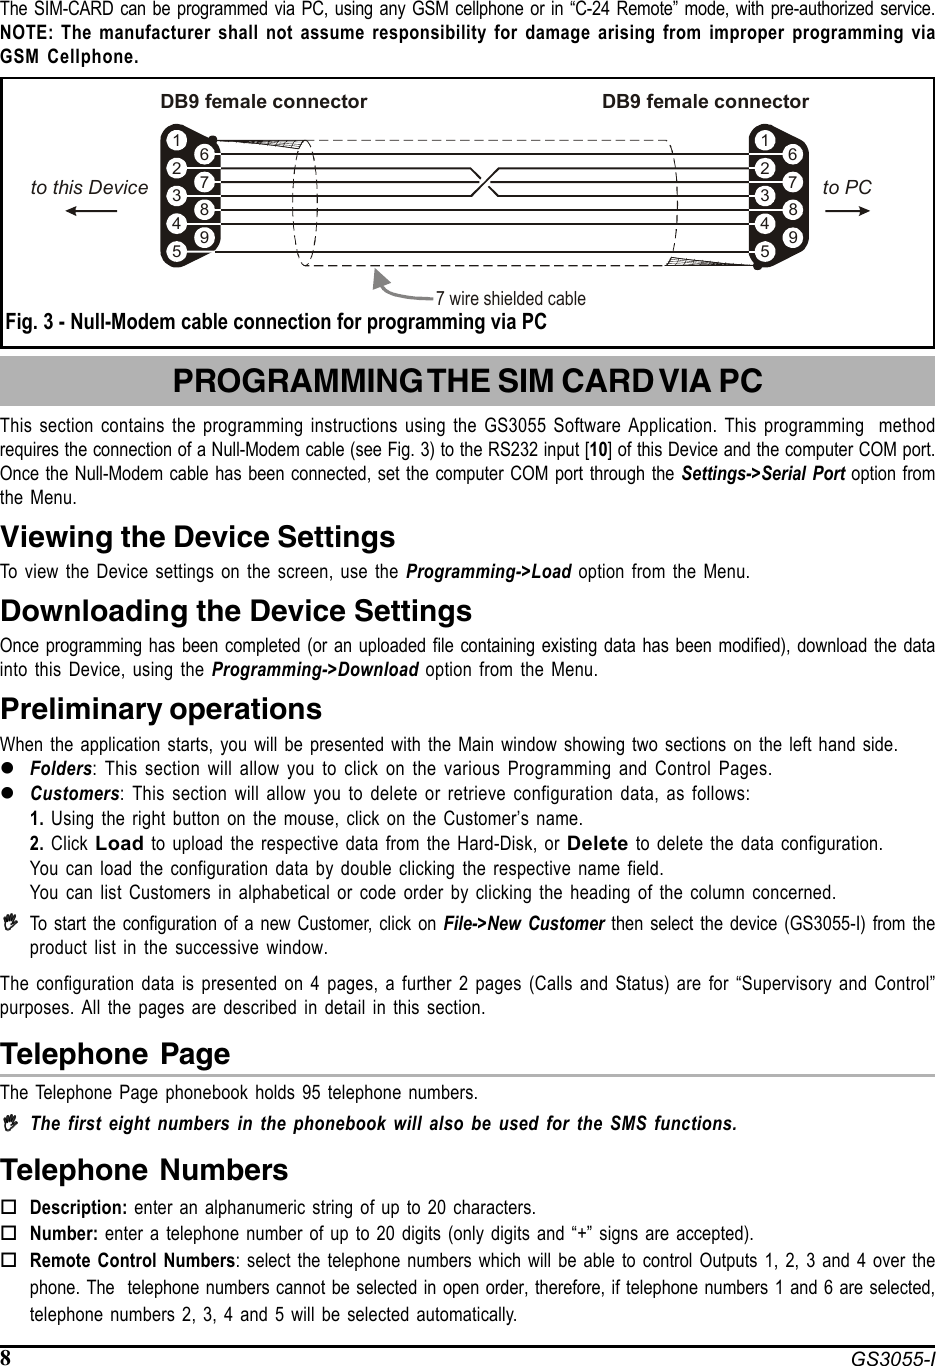 8 GS3055-IThe SIM-CARD can be programmed via PC, using any GSM cellphone or in “C-24 Remote” mode, with pre-authorized service.NOTE: The manufacturer shall not assume responsibility for damage arising from improper programming viaGSM Cellphone. Fig. 3 - Null-Modem cable connection for programming via PCPROGRAMMING THE SIM CARD VIA PCThis section contains the programming instructions using the GS3055 Software Application. This programming  methodrequires the connection of a Null-Modem cable (see Fig. 3) to the RS232 input [10] of this Device and the computer COM port.Once the Null-Modem cable has been connected, set the computer COM port through the Settings-&gt;Serial Port option fromthe Menu.Viewing the Device SettingsTo view the Device settings on the screen, use the Programming-&gt;Load option from the Menu.Downloading the Device SettingsOnce programming has been completed (or an uploaded file containing existing data has been modified), download the datainto this Device, using the Programming-&gt;Download option from the Menu.Preliminary operationsWhen the application starts, you will be presented with the Main window showing two sections on the left hand side.zFolders: This section will allow you to click on the various Programming and Control Pages.zCustomers: This section will allow you to delete or retrieve configuration data, as follows:1. Using the right button on the mouse, click on the Customer’s name.2. Click  Load to upload the respective data from the Hard-Disk, or Delete to delete the data configuration.You can load the configuration data by double clicking the respective name field.You can list Customers in alphabetical or code order by clicking the heading of the column concerned.,,,,,To start the configuration of a new Customer, click on File-&gt;New Customer then select the device (GS3055-I) from theproduct list in the successive window.The configuration data is presented on 4 pages, a further 2 pages (Calls and Status) are for “Supervisory and Control”purposes. All the pages are described in detail in this section.Telephone PageThe Telephone Page phonebook holds 95 telephone numbers.,,,,,The first eight numbers in the phonebook will also be used for the SMS functions.Telephone NumbersDescription: enter an alphanumeric string of up to 20 characters.Number: enter a telephone number of up to 20 digits (only digits and “+” signs are accepted).Remote Control Numbers: select the telephone numbers which will be able to control Outputs 1, 2, 3 and 4 over thephone. The  telephone numbers cannot be selected in open order, therefore, if telephone numbers 1 and 6 are selected,telephone numbers 2, 3, 4 and 5 will be selected automatically.5 54 49 98 87 76 63 32 21 1DB9 female connector7 wire shielded cableDB9 female connectorto PCto this Device